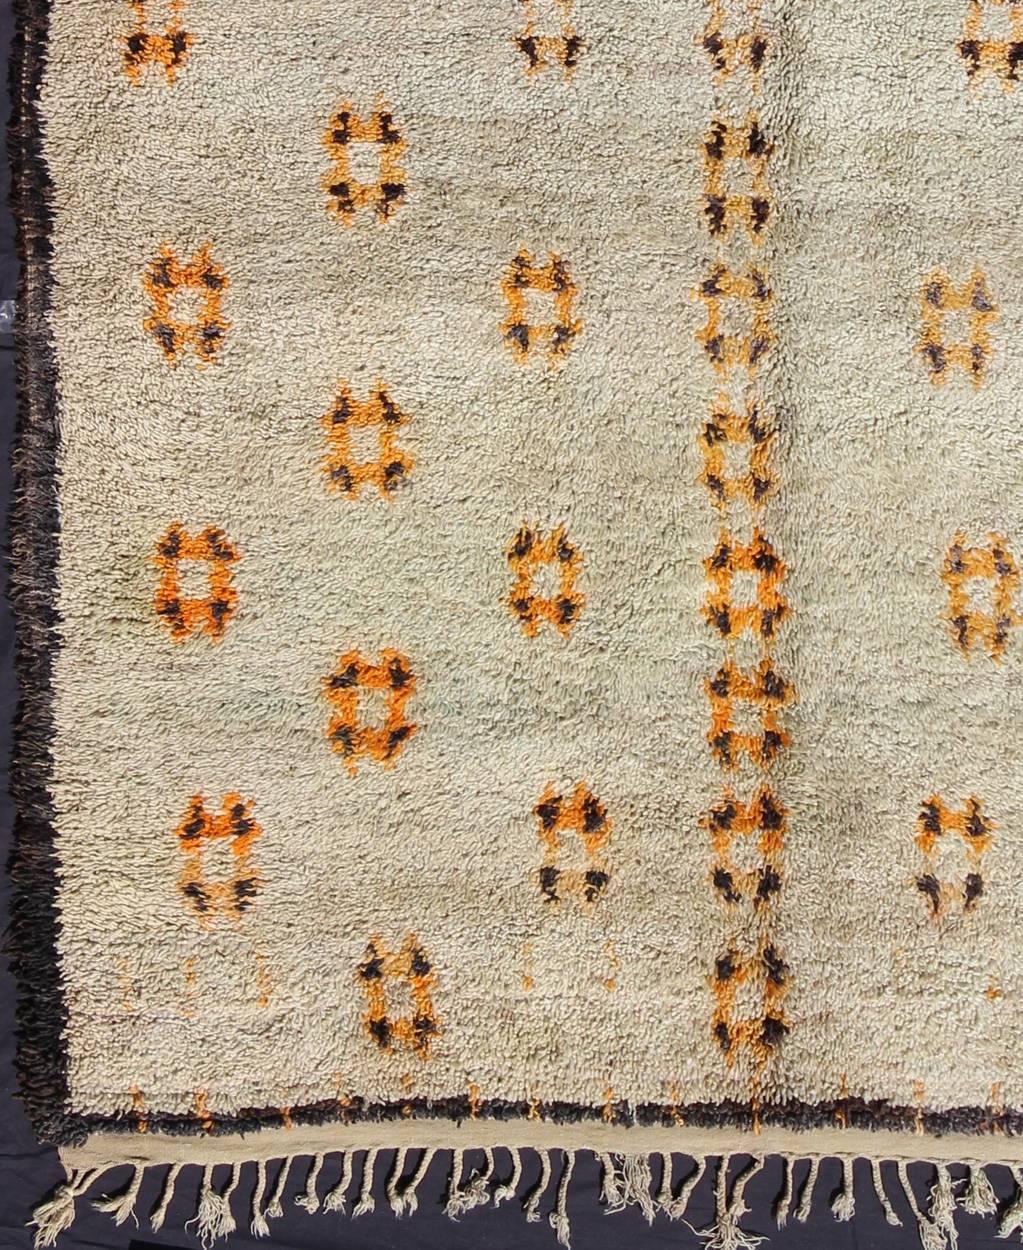 Measures: 7'4'' x 11'4''.
This rug features organic and wonderfully creative design compositions that, in the past, were often based on obscure tribal traditions and beliefs. Warm to the base, this gorgeous and delicate carpet features unusually